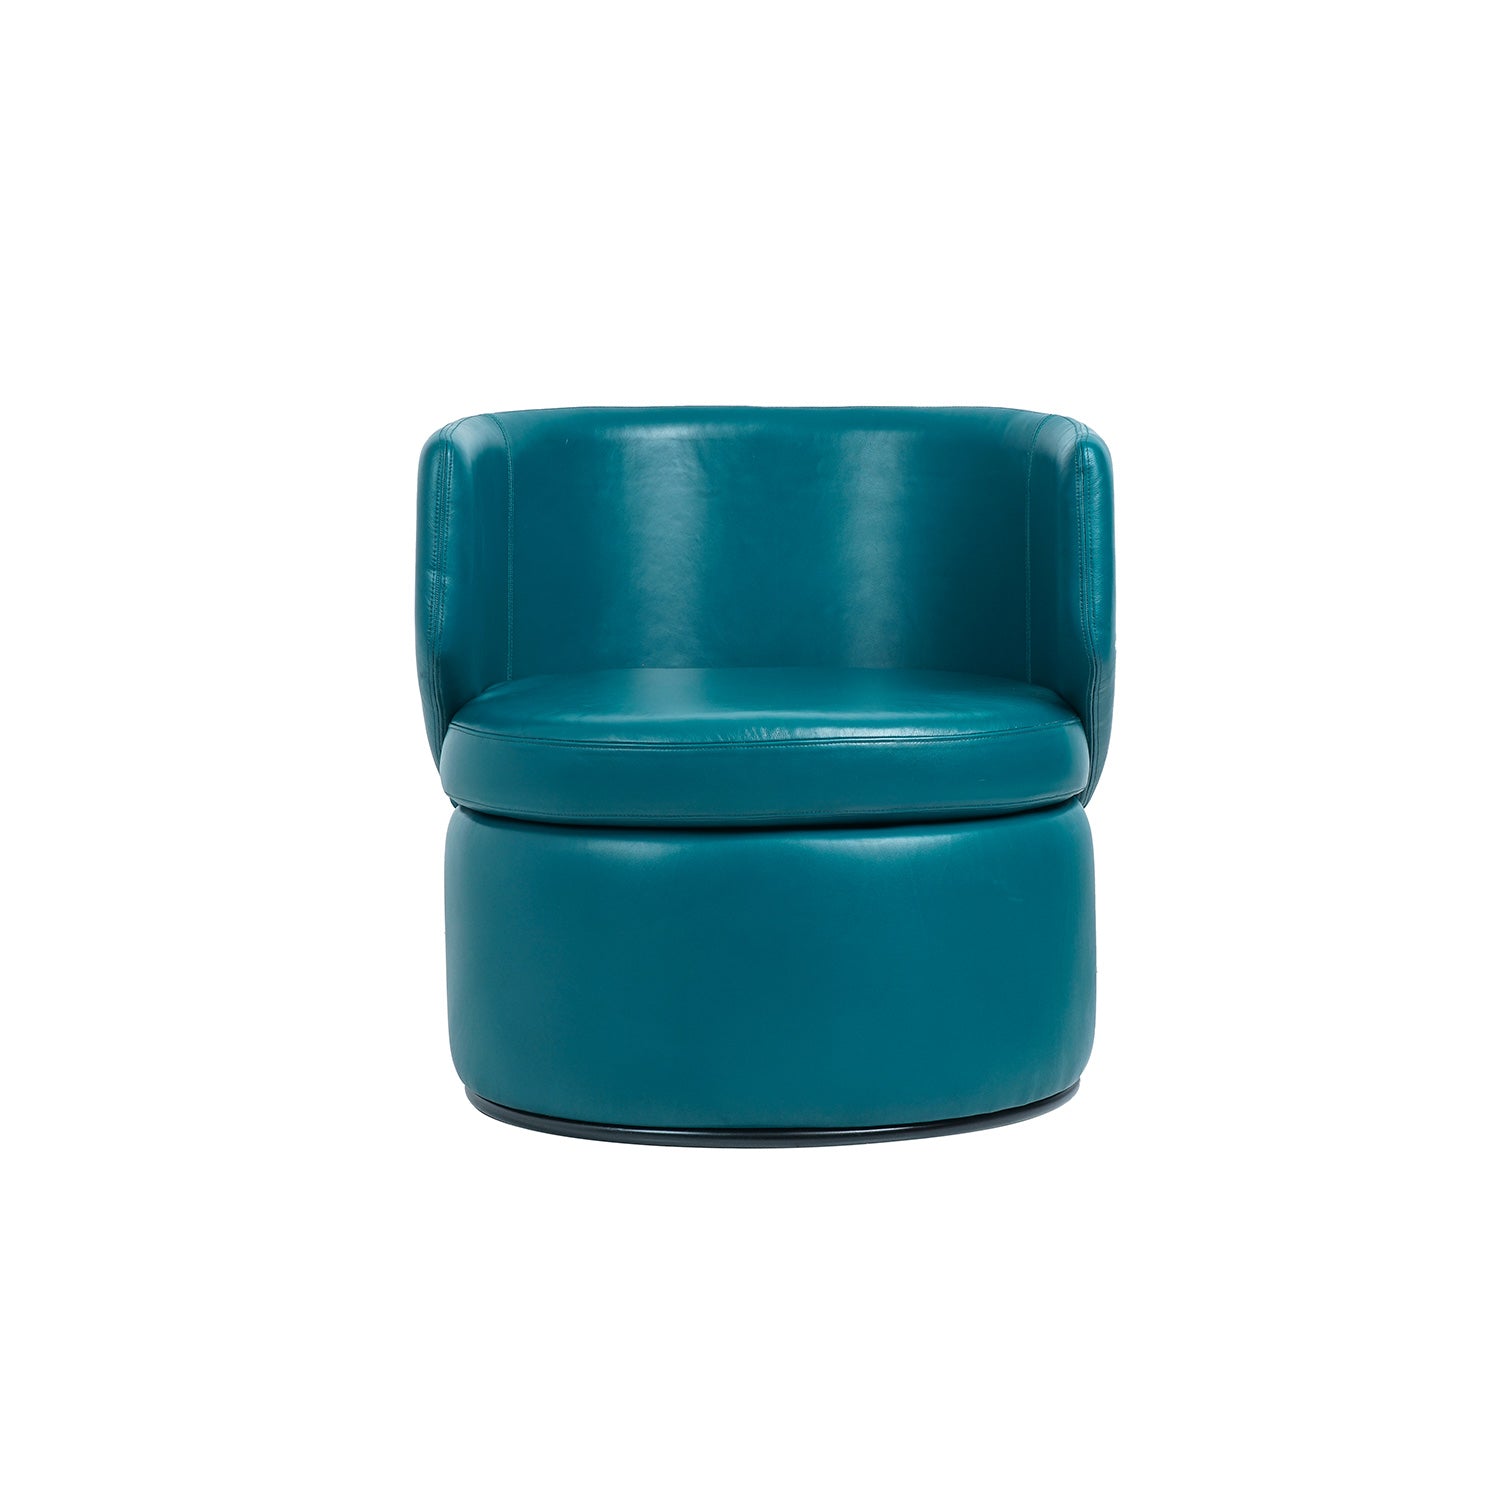 Juliet Sapi Leather Chair Teal Front